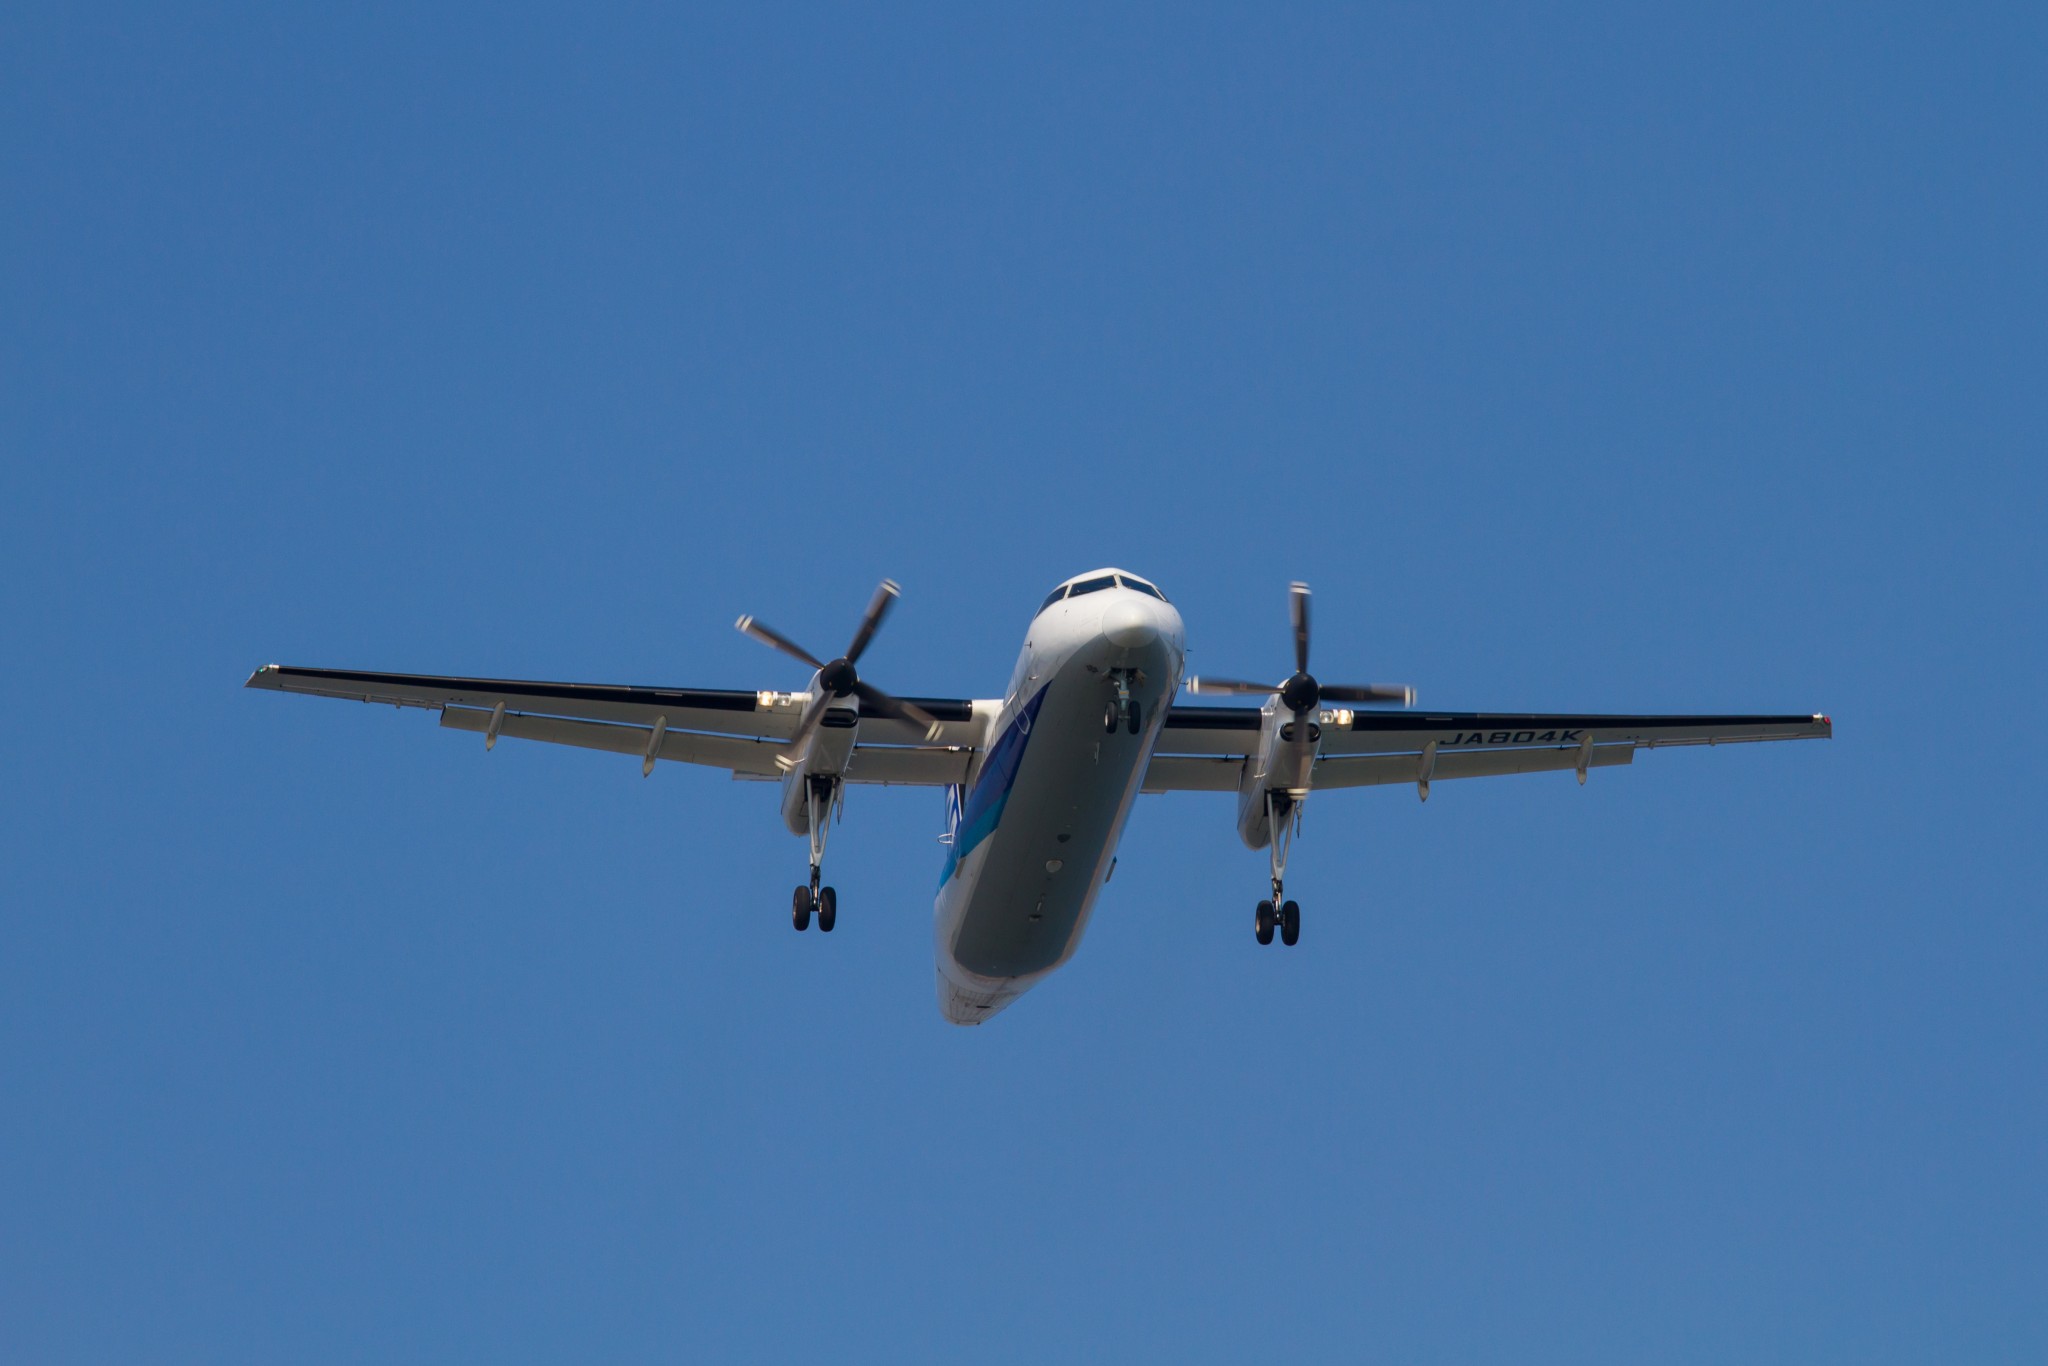 NAC executes lease agreements for Dash 8-400s with Aviair